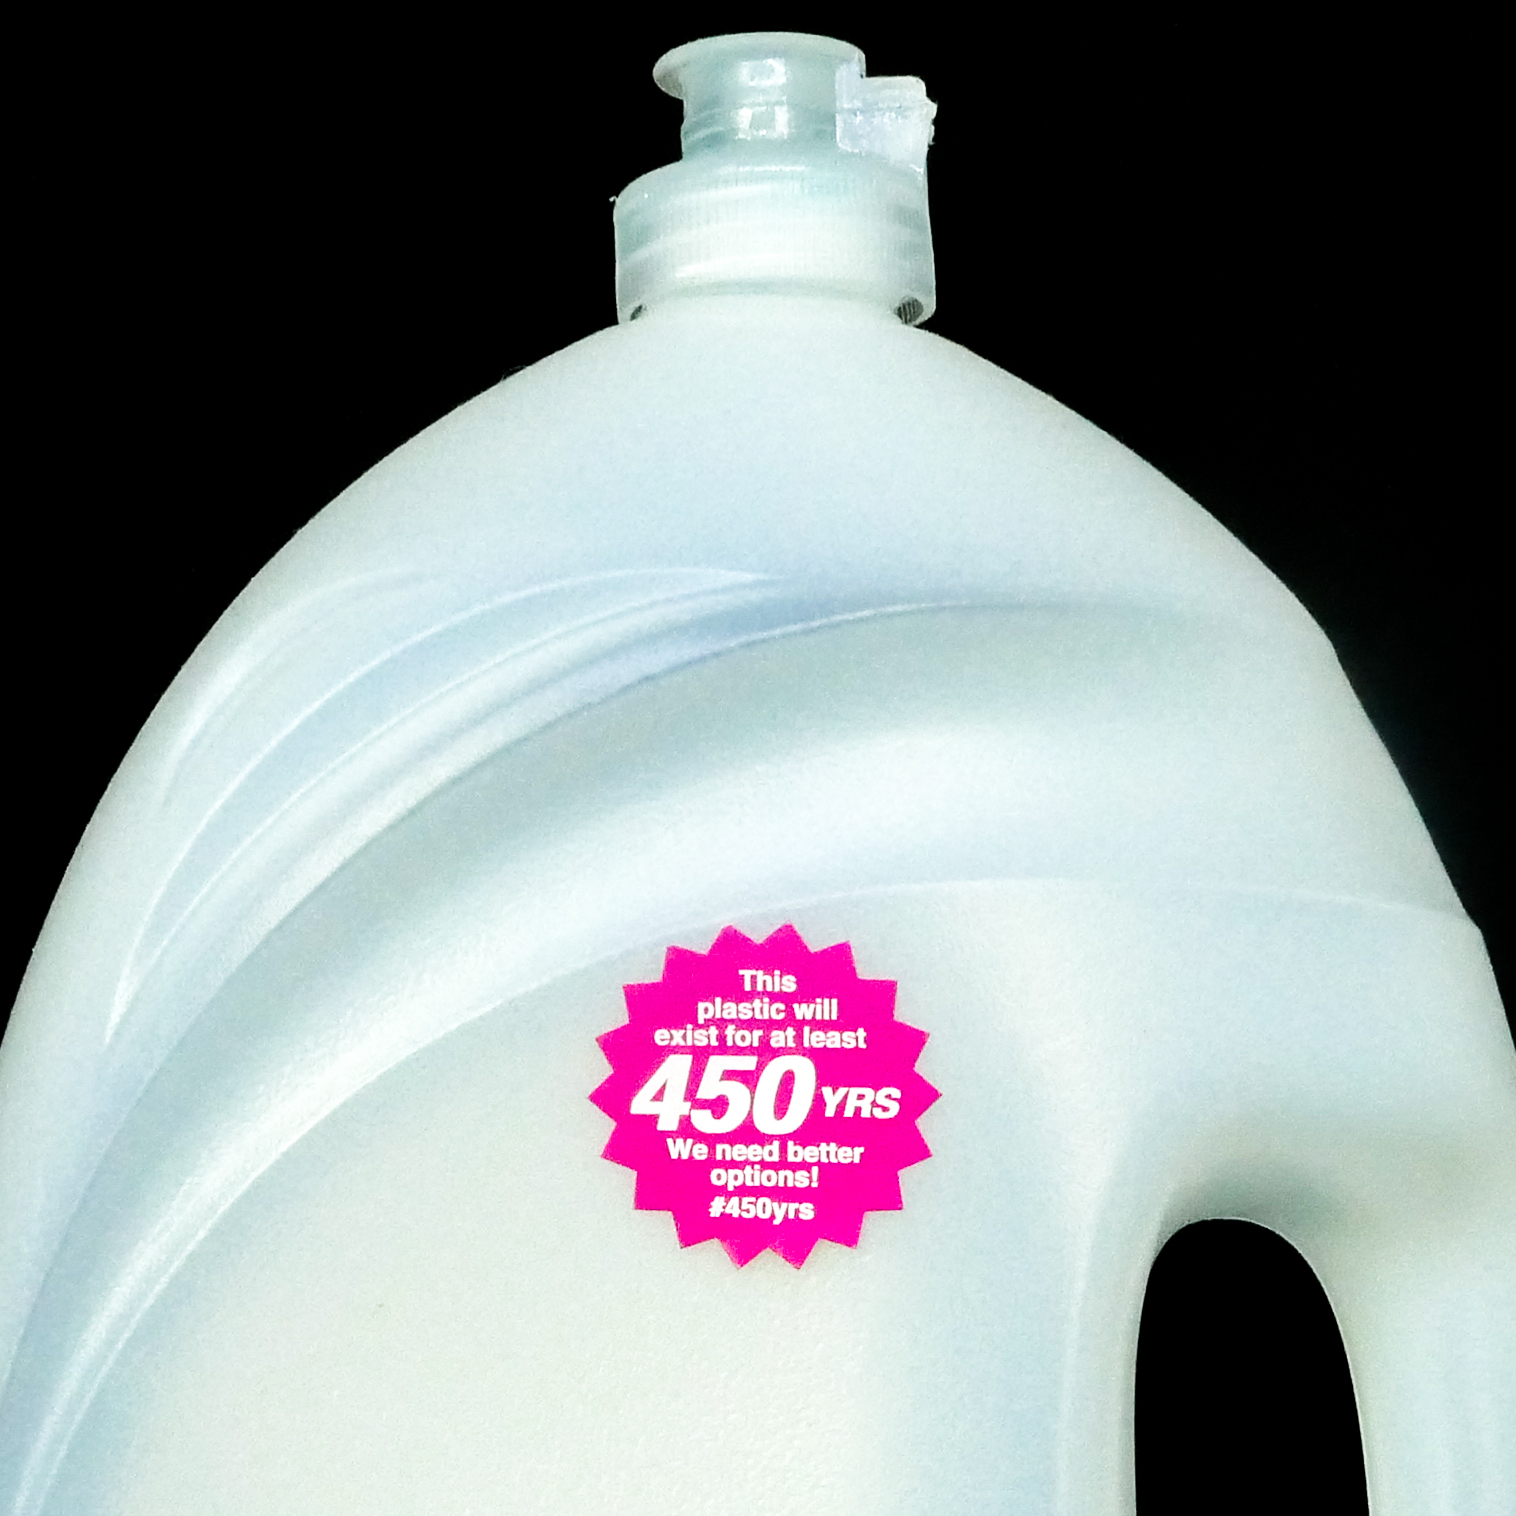 Thumbnail of Close-up photograph of a clear, plastic laundry detergent container. On the front of the container, is a magenta, starburst-shaped sticker that says, 'This plastic will exist for at least 450 YRS. We need better options! #450yrs.'